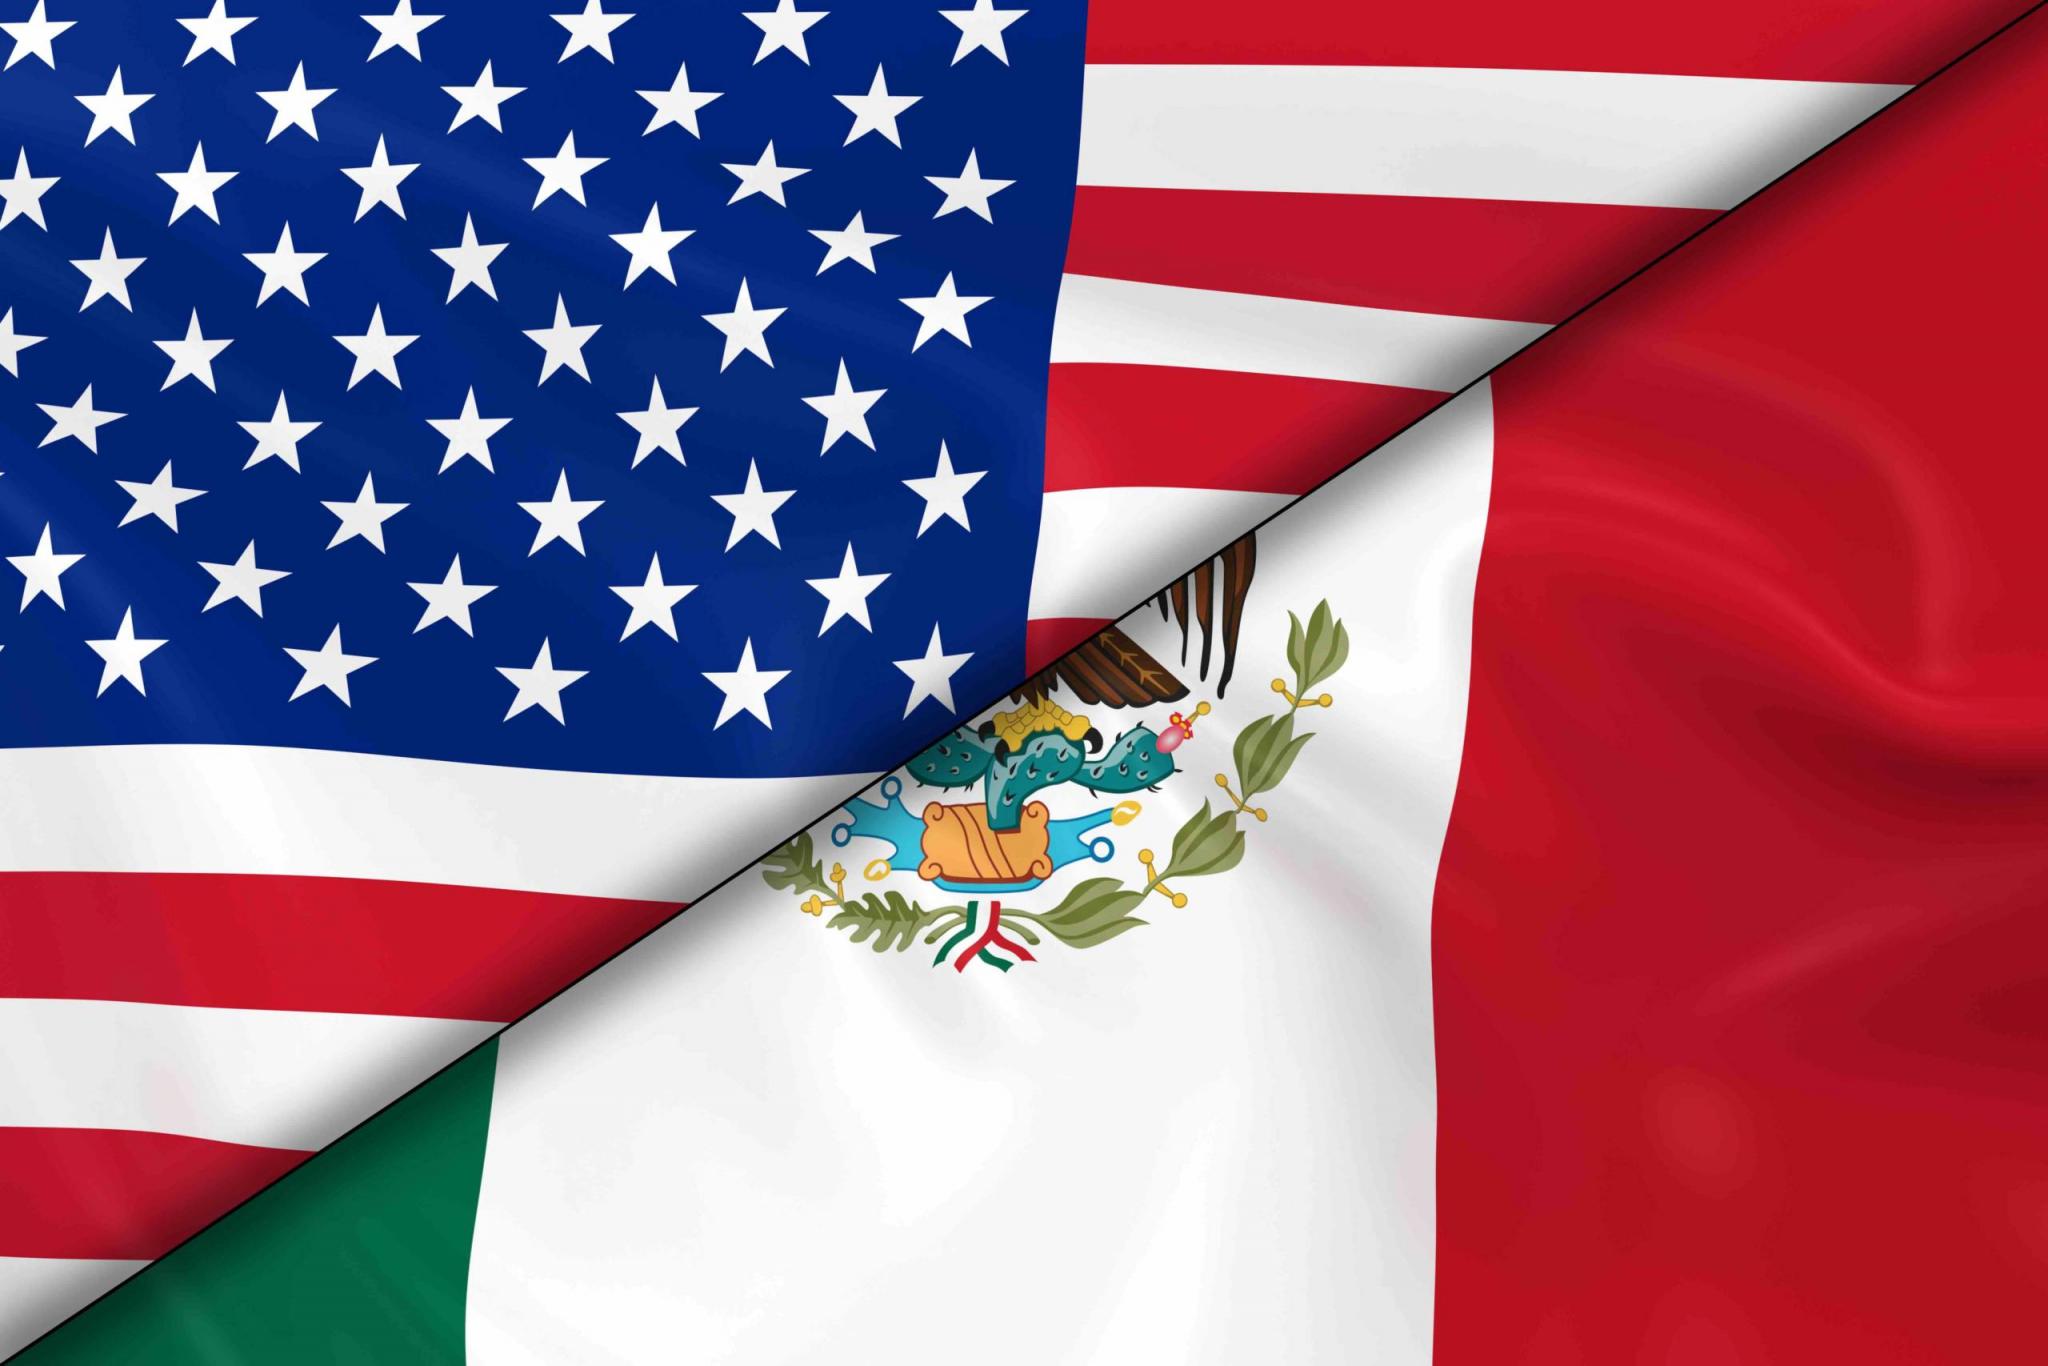 Flags of the United States of America and Mexico Divided Diagonally